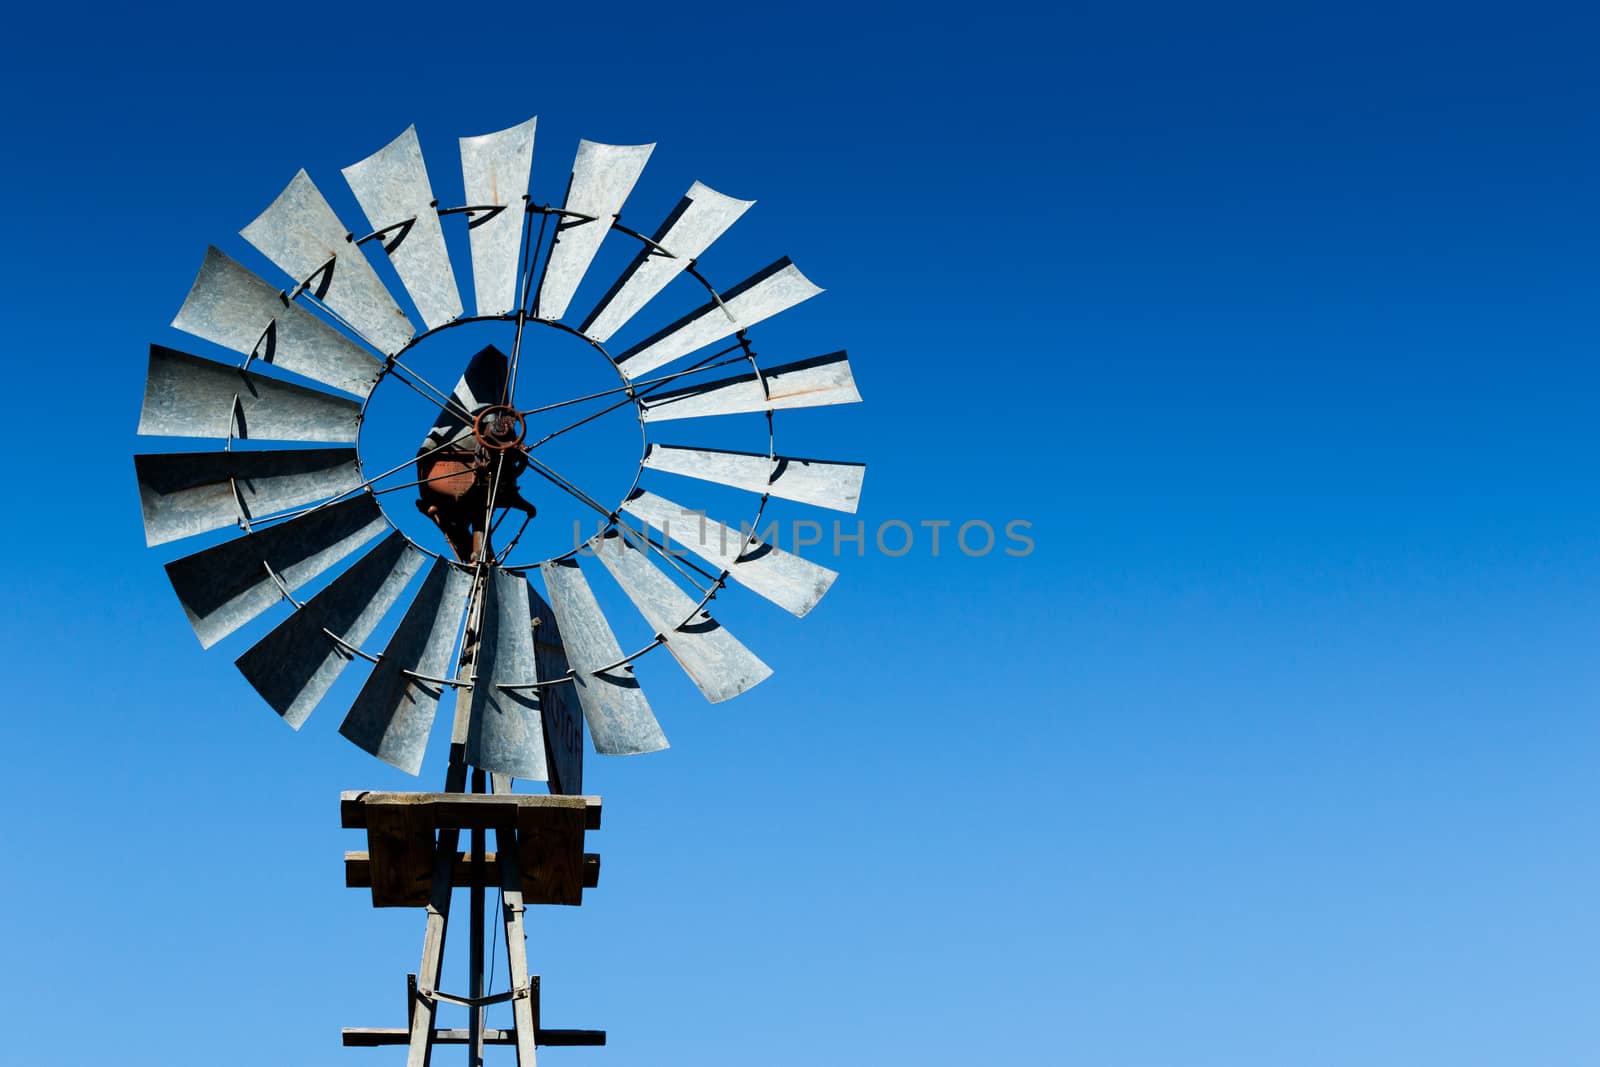 Windmill - Mountain Zebra National Park is a national park in the Eastern Cape province of South Africa proclaimed in July 1937 for the purpose of providing a nature reserve for the endangered Cape mountain zebra.